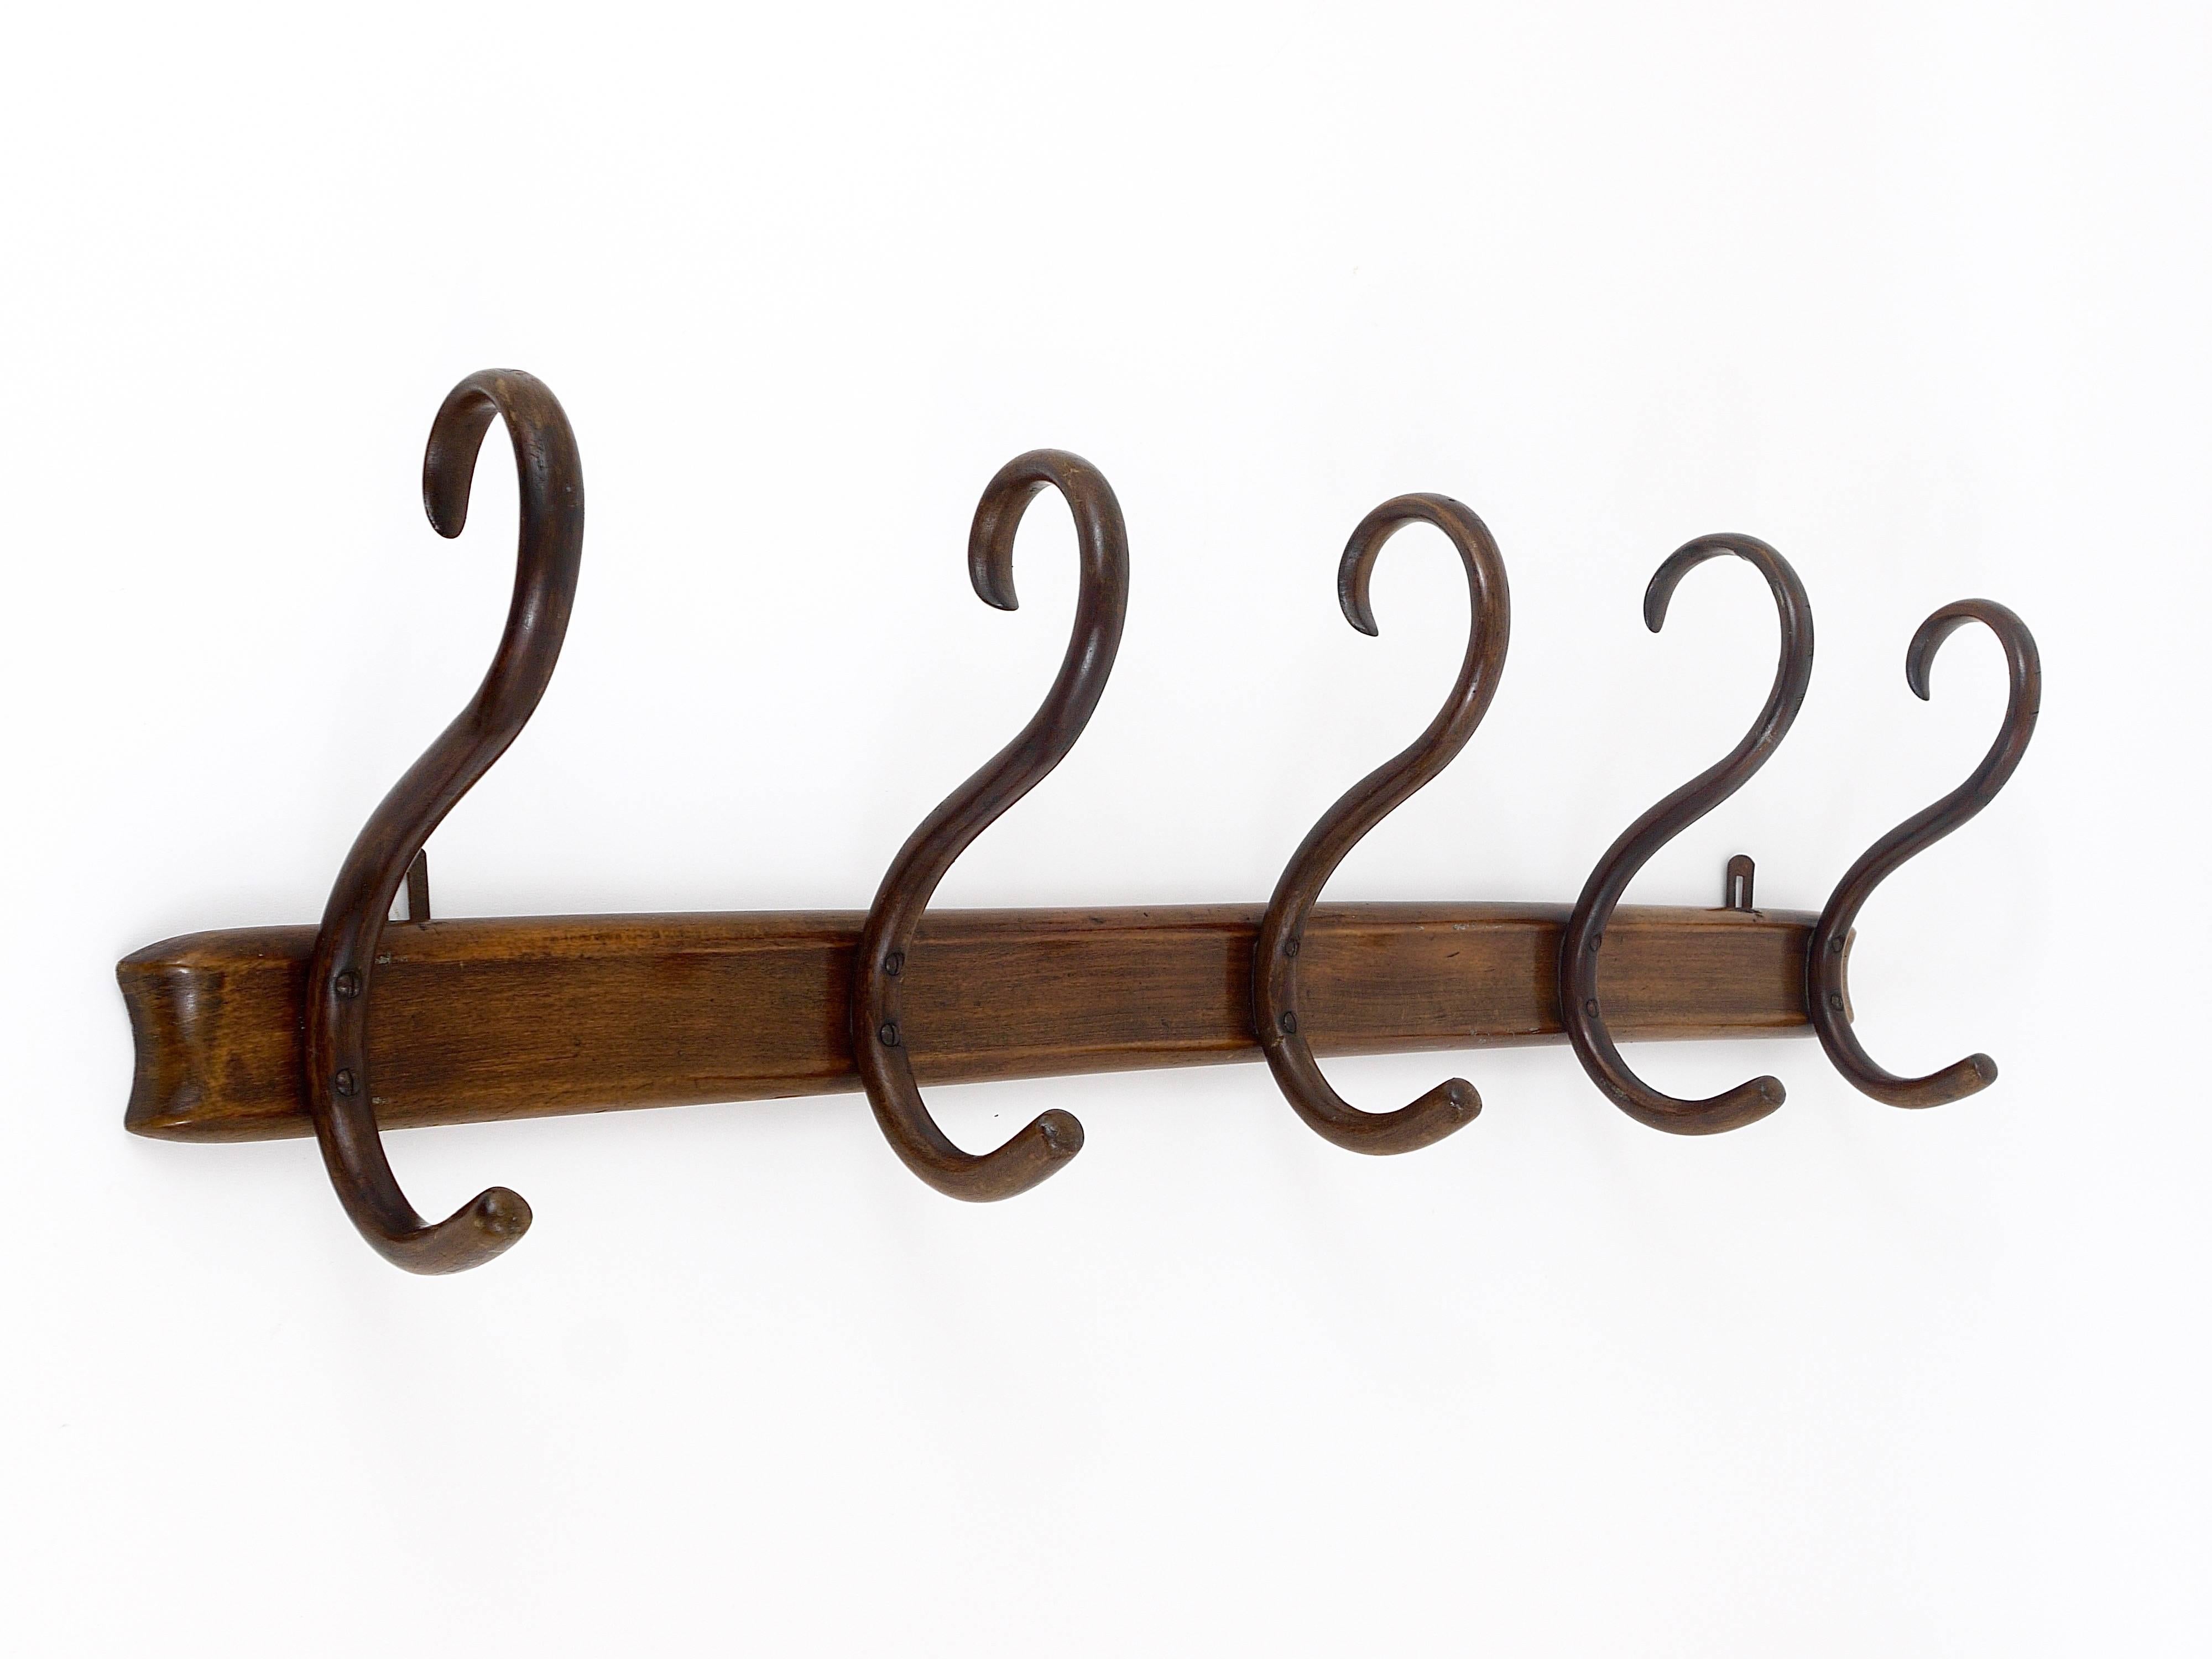 A beautiful brown Art Nouveau wall-mounted coat and hat rack from the 1920s, executed by Thonet Vienna. Made of bentwood, with four S-shaped hooks. Labelled on its backside. In good condition with patina. Please notice a nearly invisible and